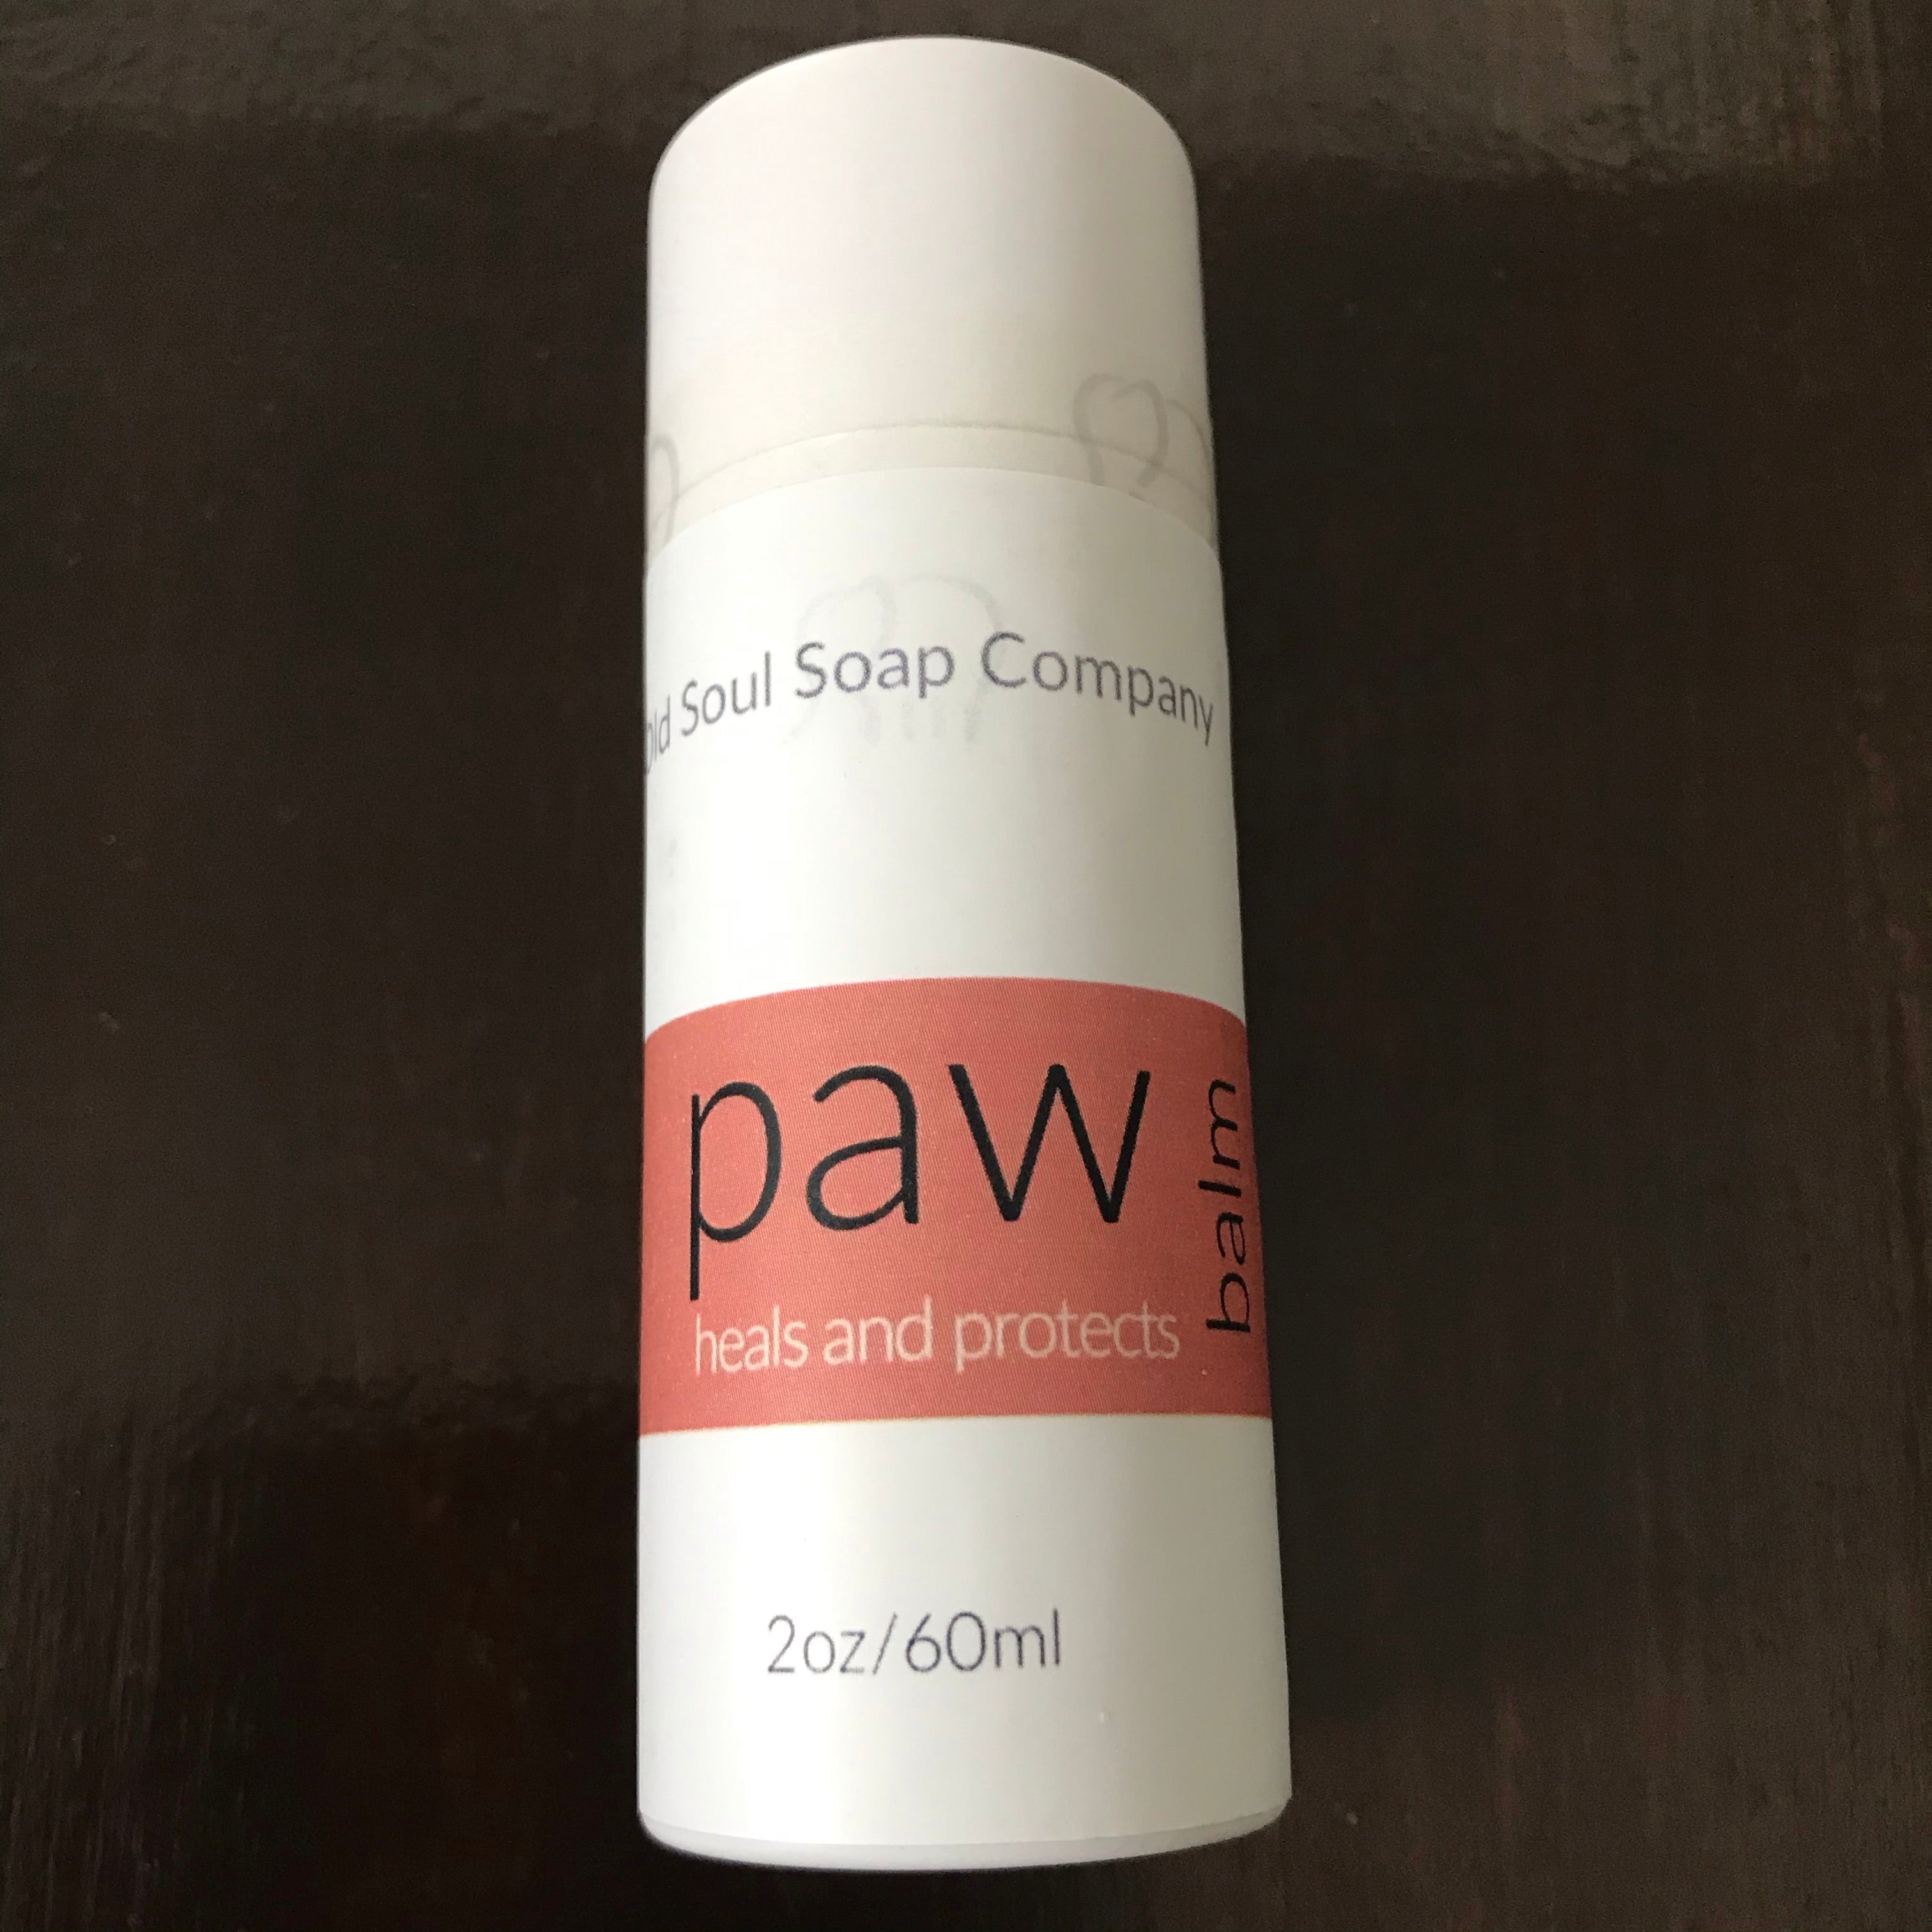 heal and protect your pets paws with a natural paw balm made in canada